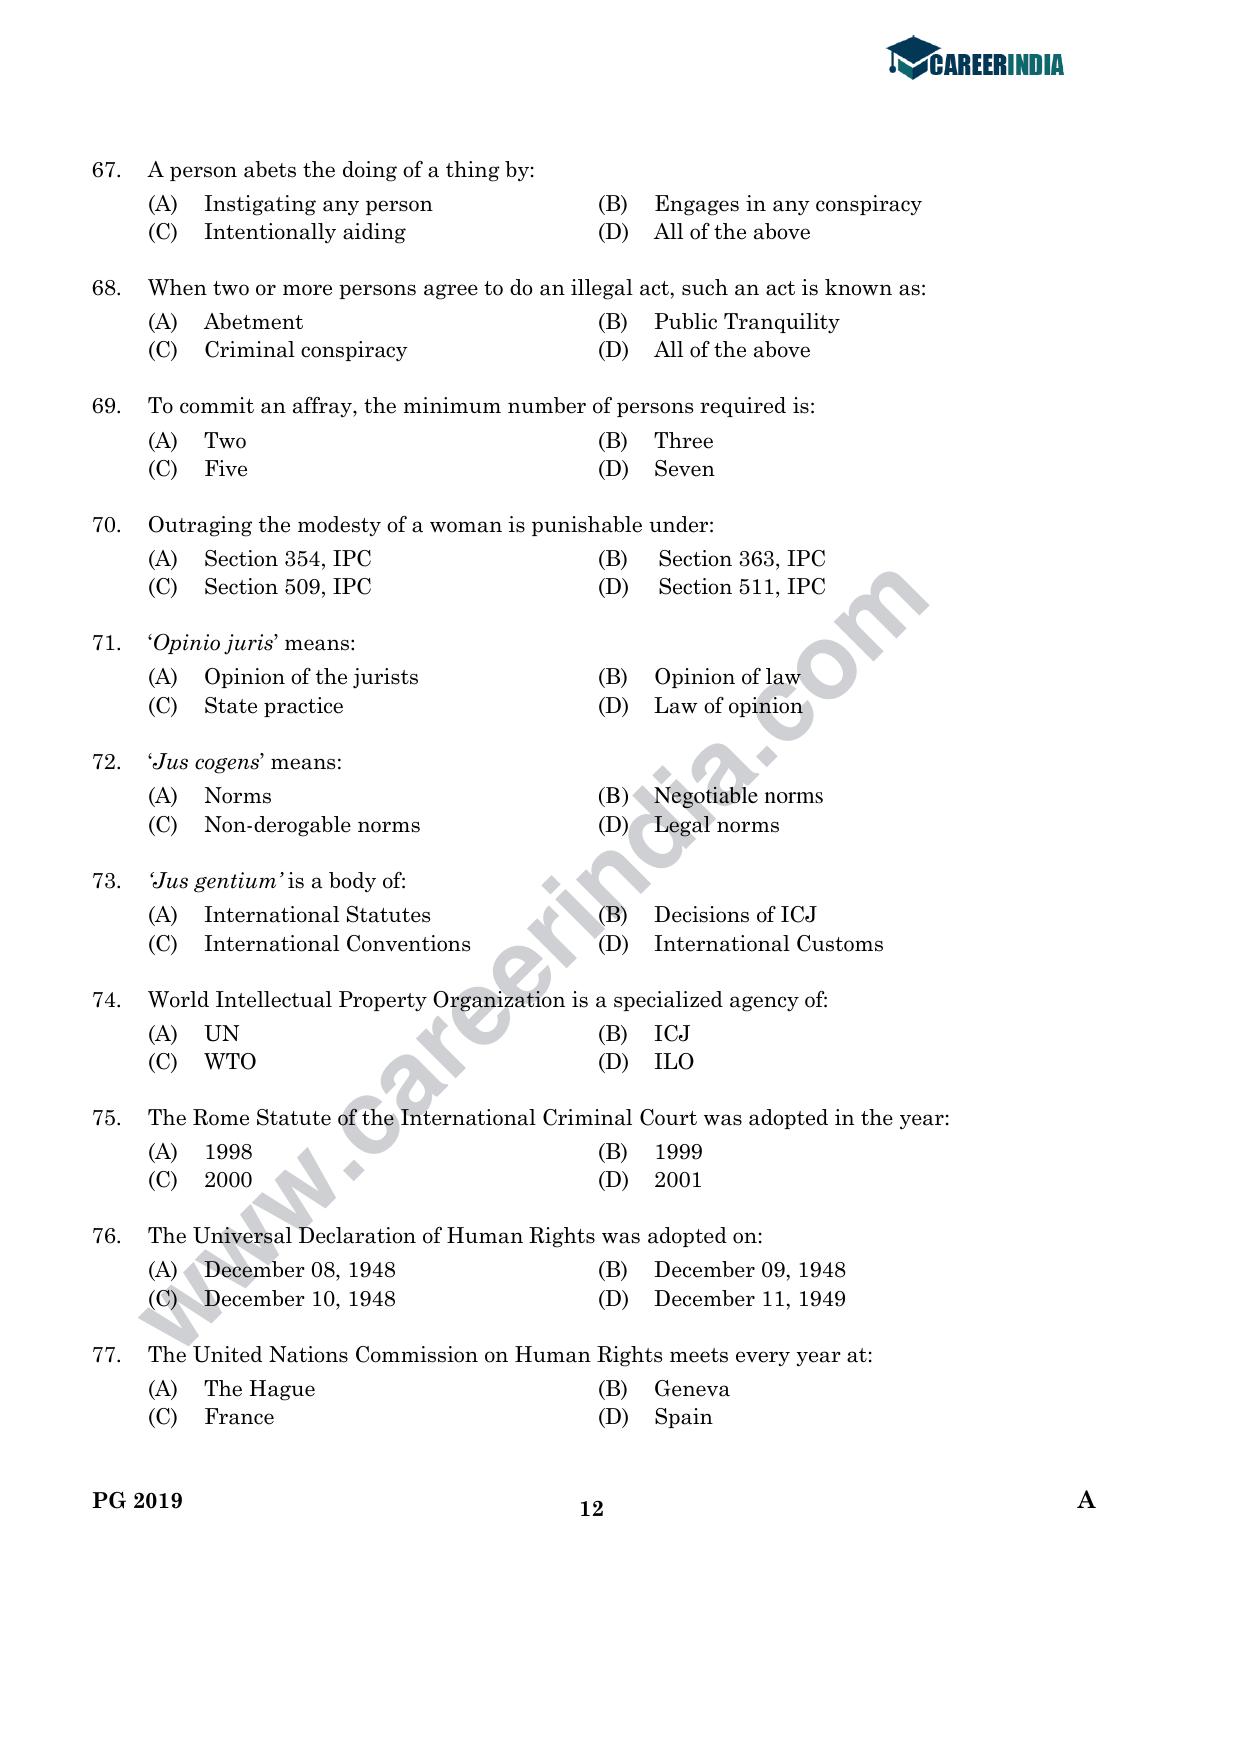 CLAT 2019 PG A-Series Question Papers (C.L.A.) - Page 11